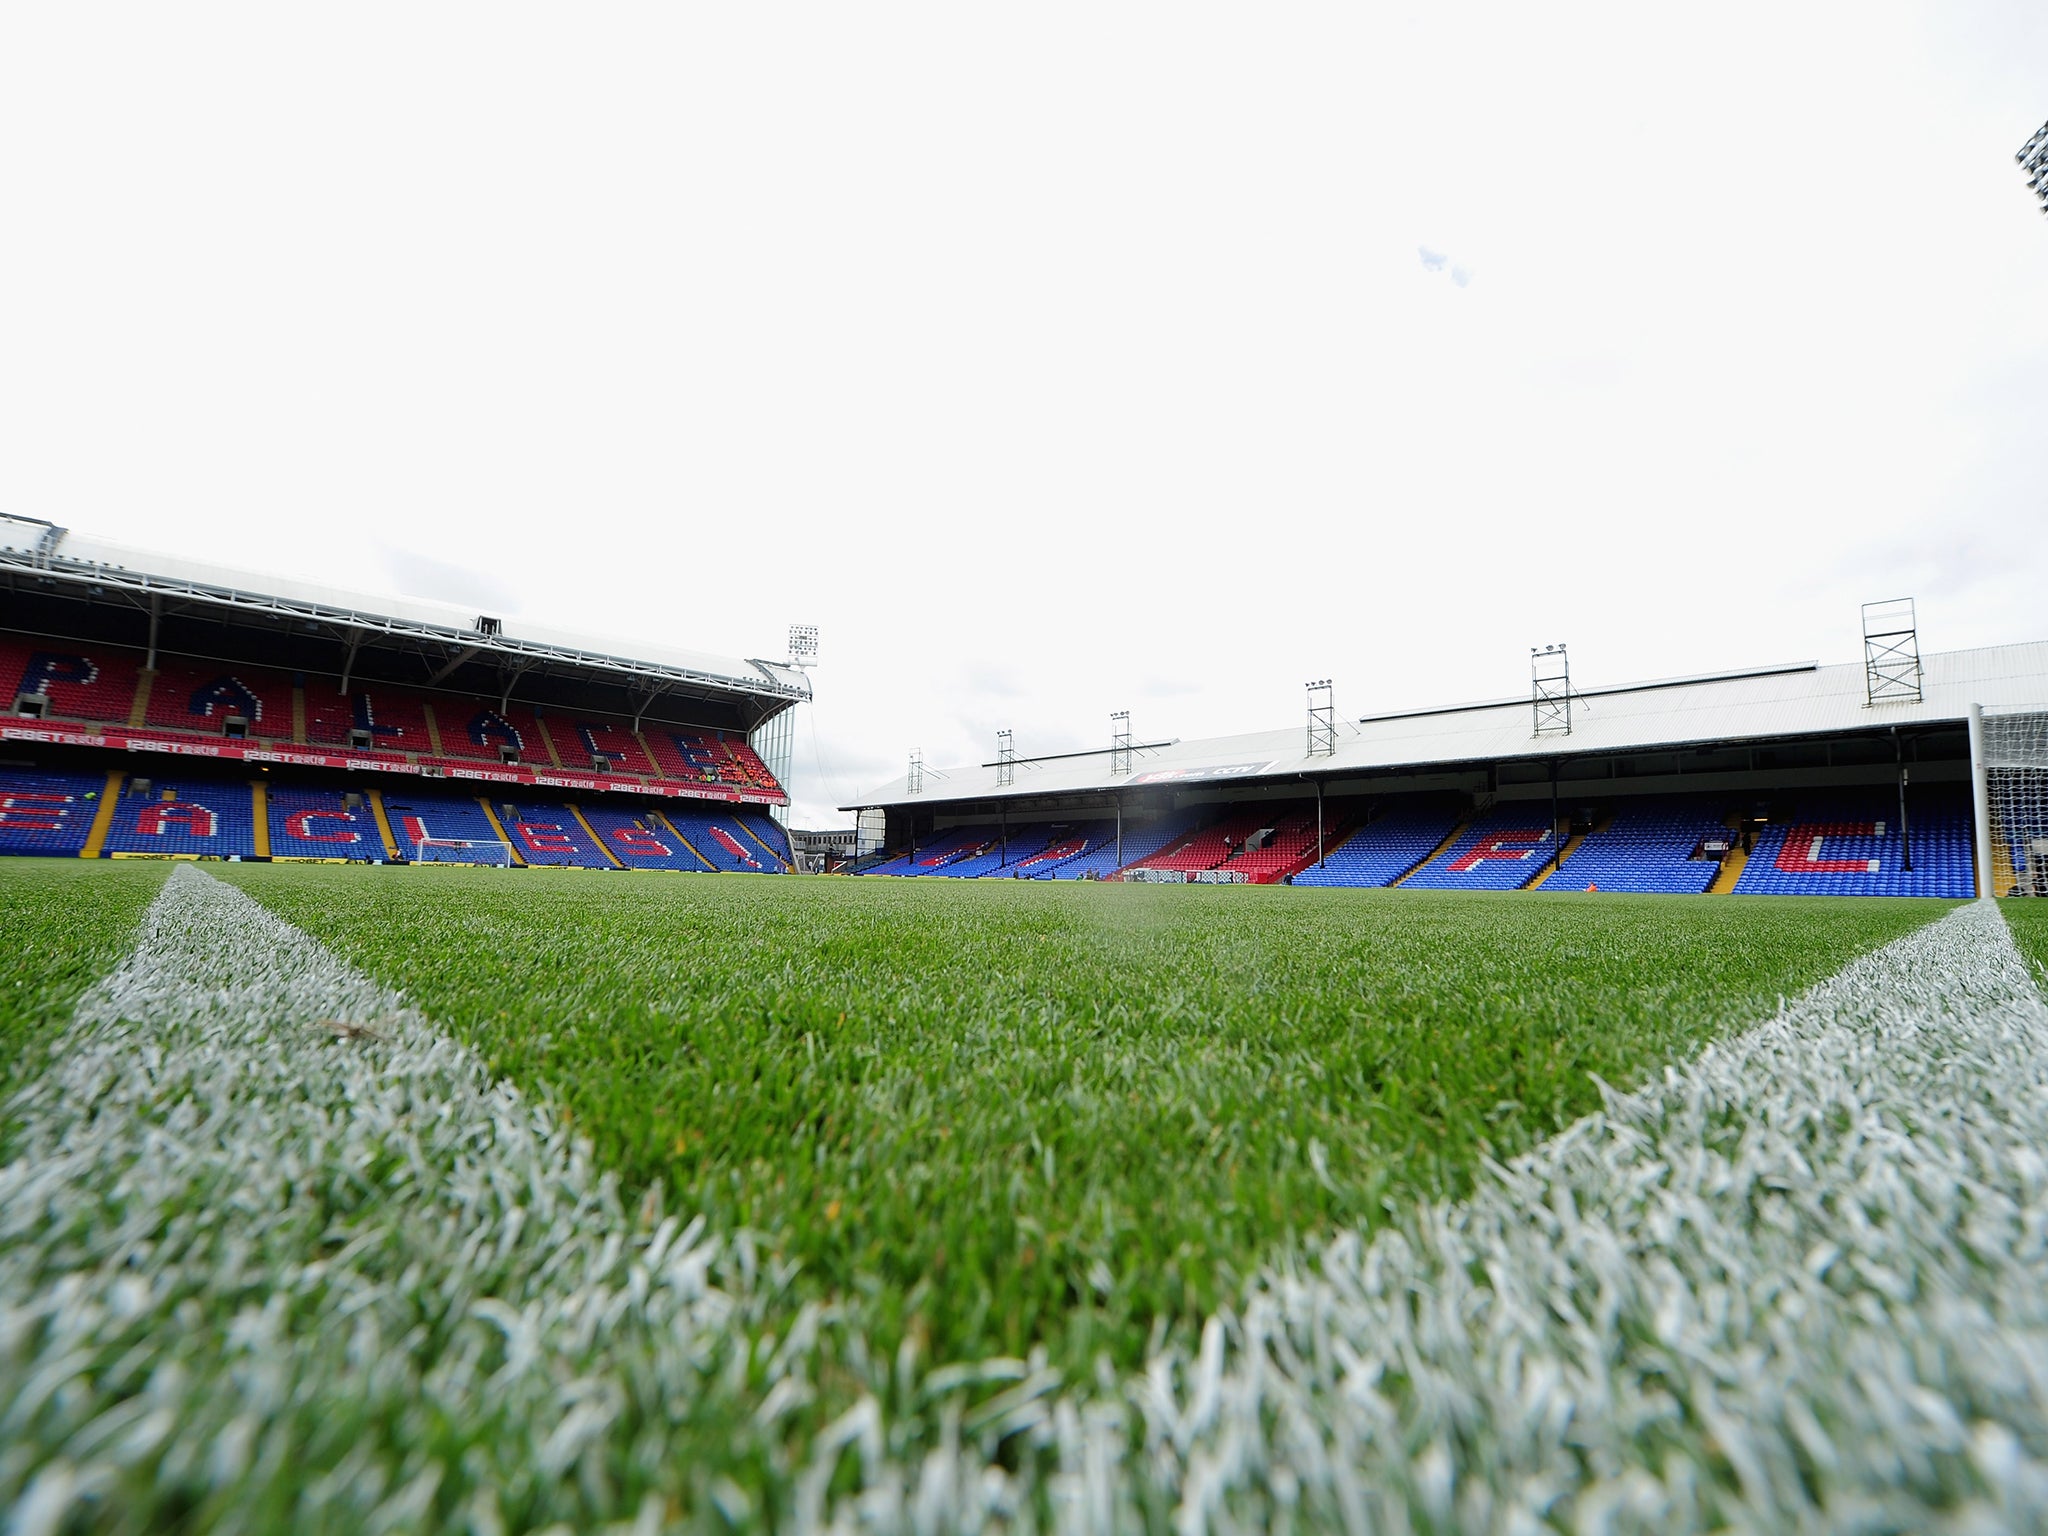 A view of Selhurst Park, home of Crystal Palace